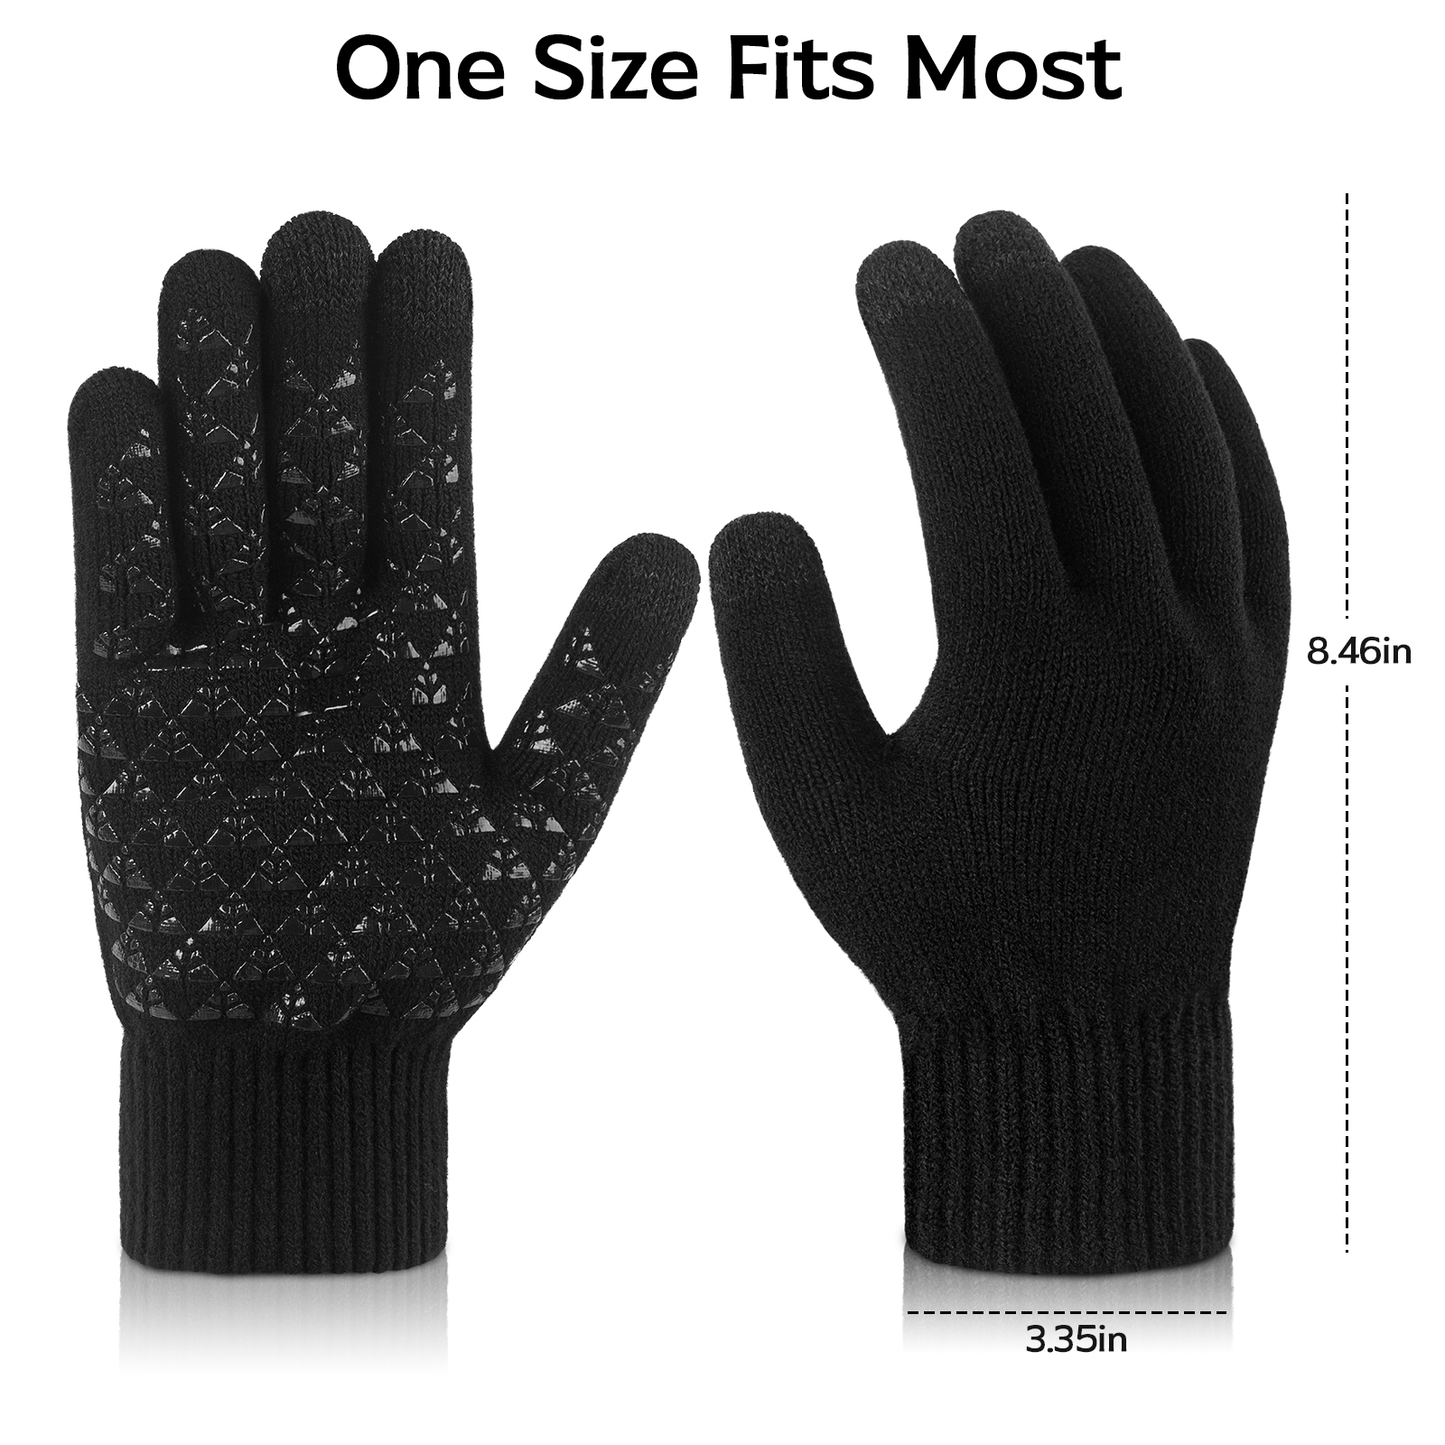 Loritta 4 Pair Winter Cycling Touch Screen Gloves Bike Elastic Cuff Gloves Warm Knit Women for Outdoor